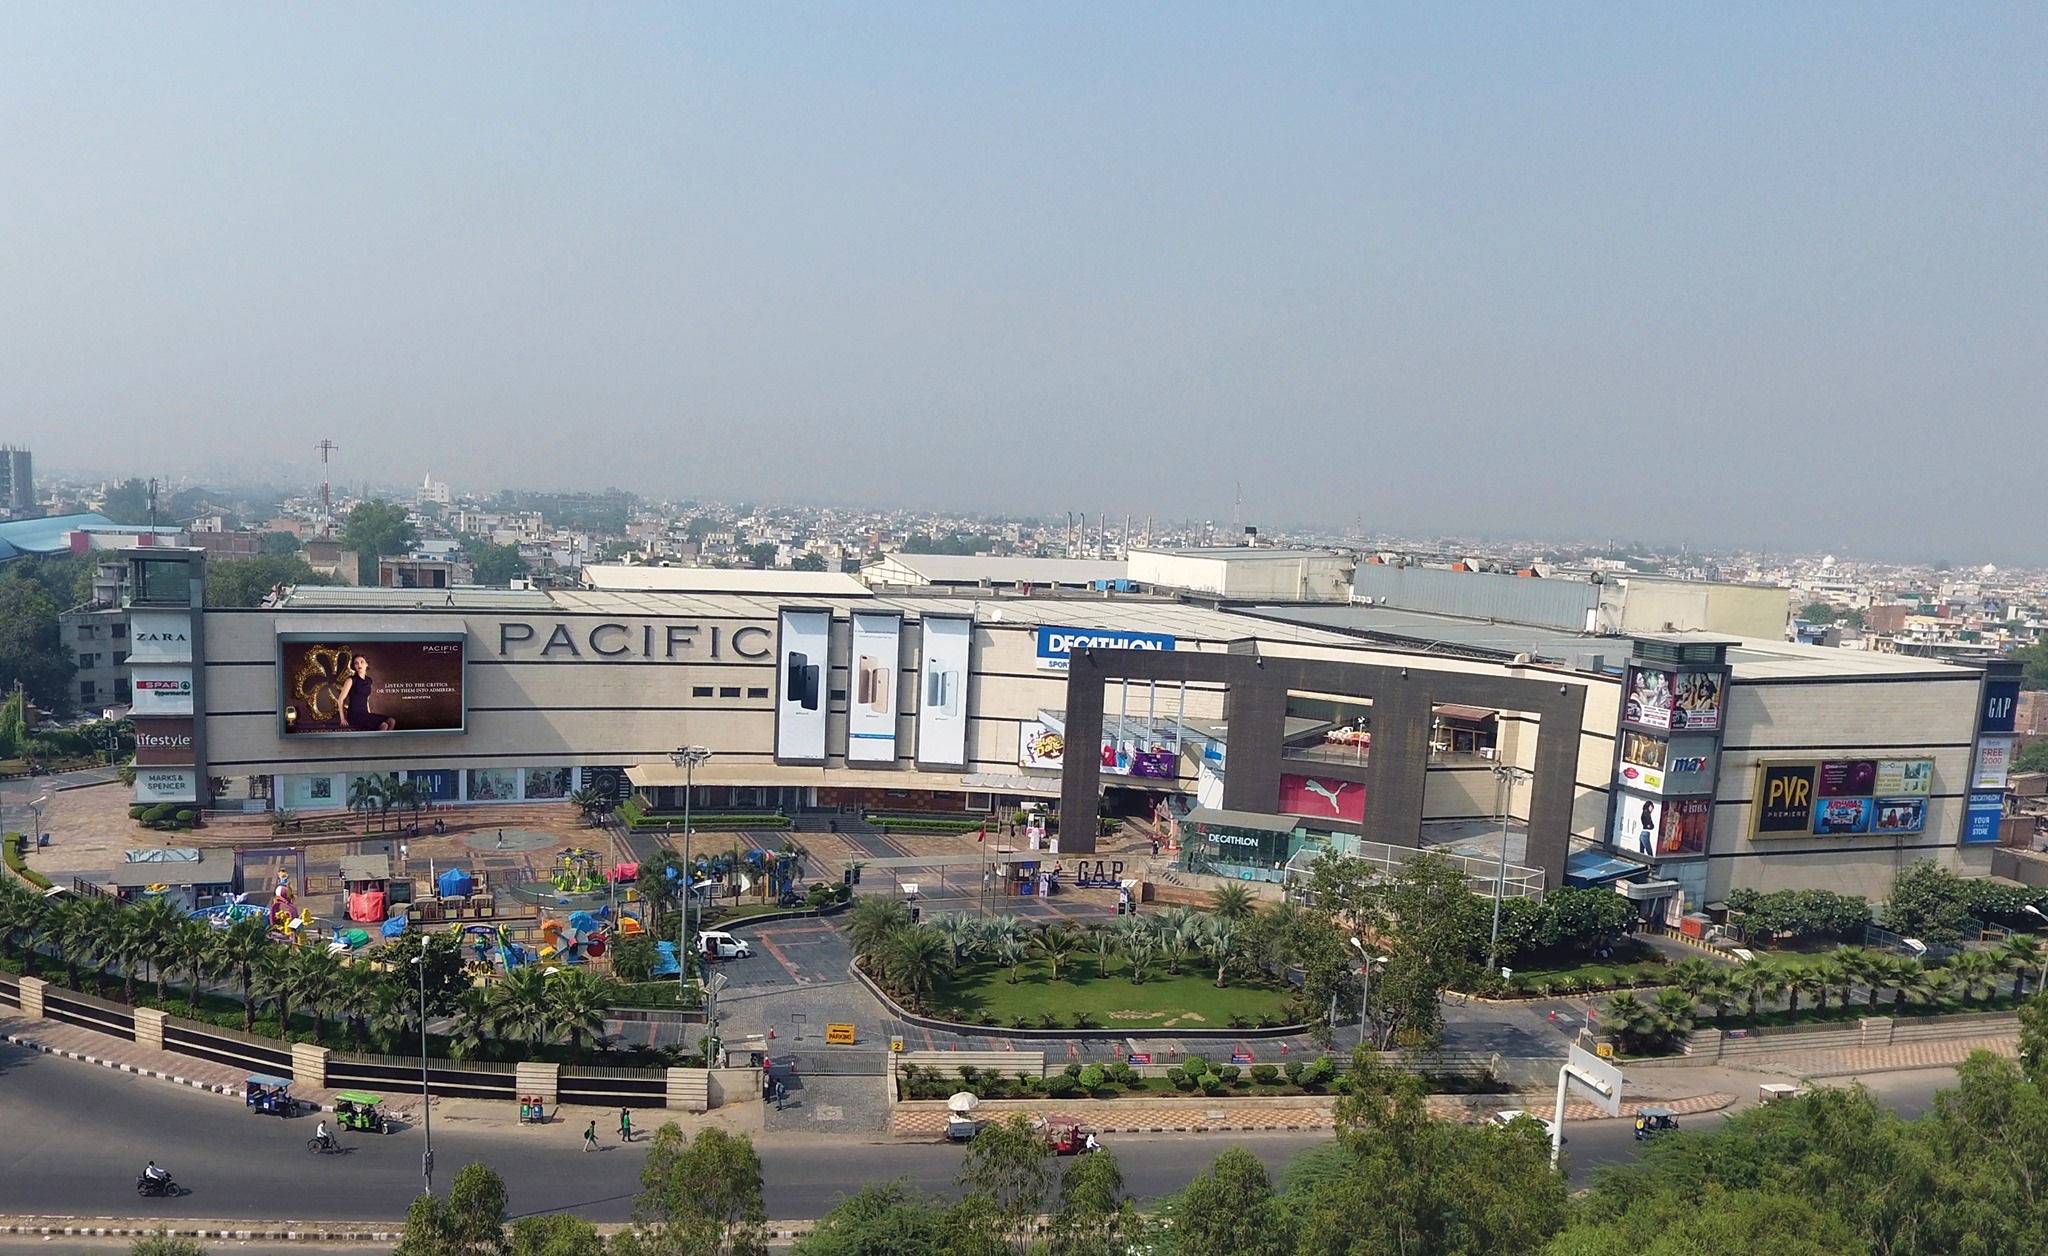 Nearest Metro Station to Pacific Mall